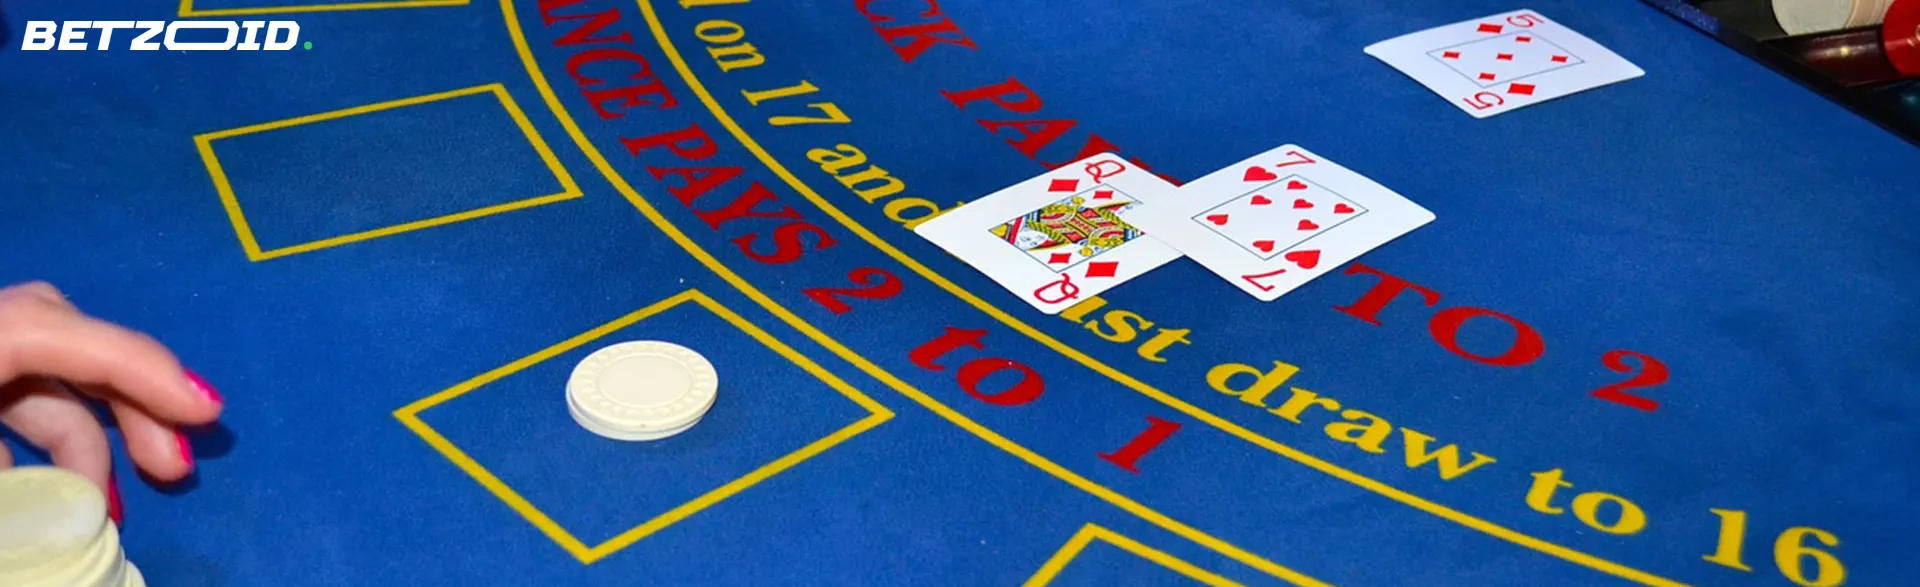 A close-up view of a blackjack table with cards showing a king and an ace, chips.